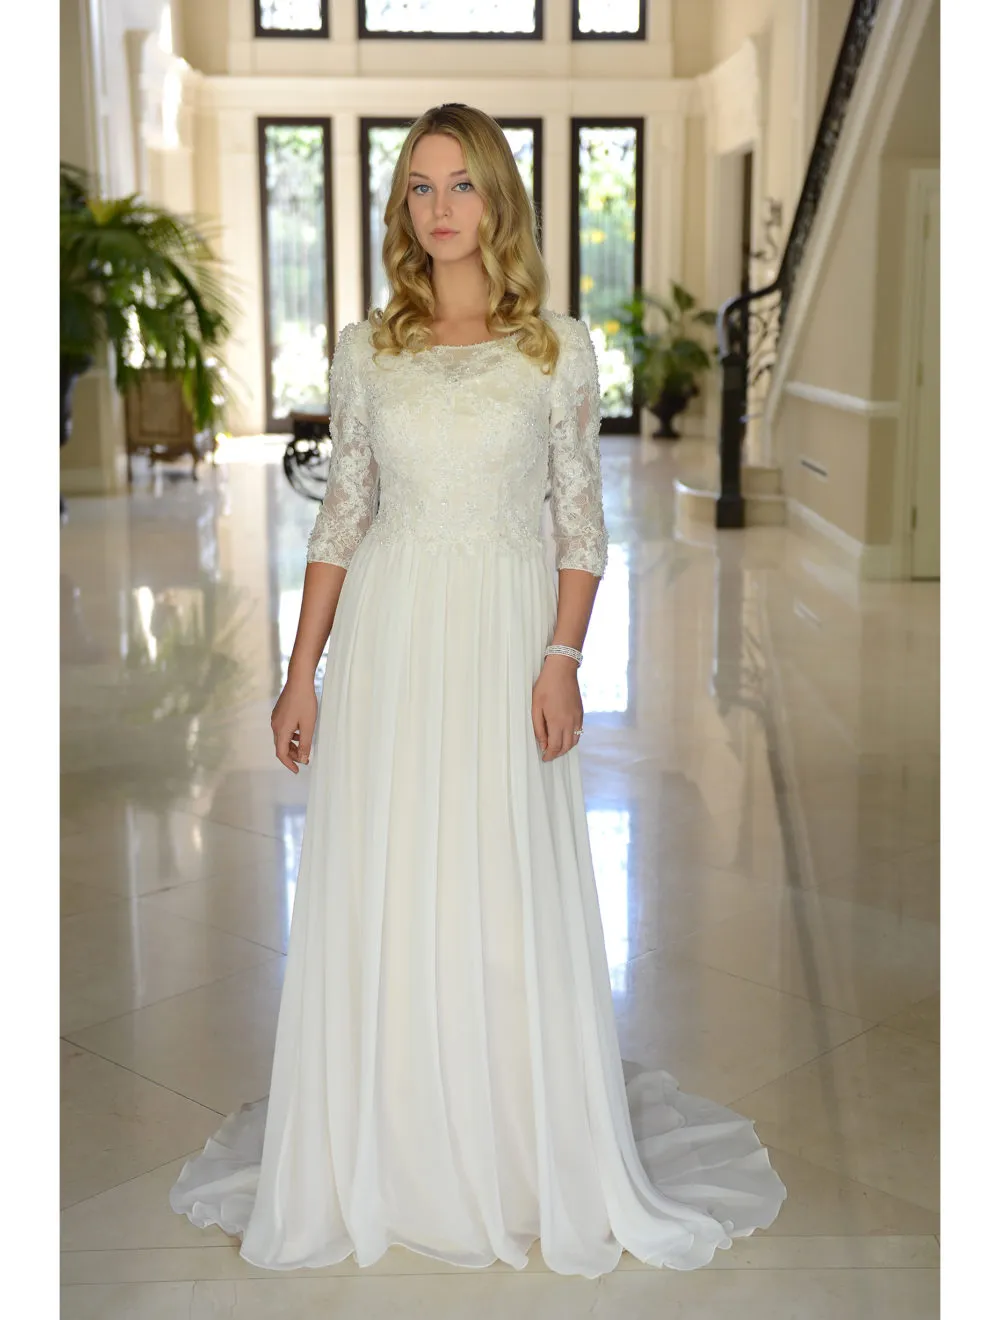 A-line Chiffon Boho Modest Wedding Dresses With Sleeves Beaded Buttons Back Lace Country Reception Bridal Gowns Couture Custom Made